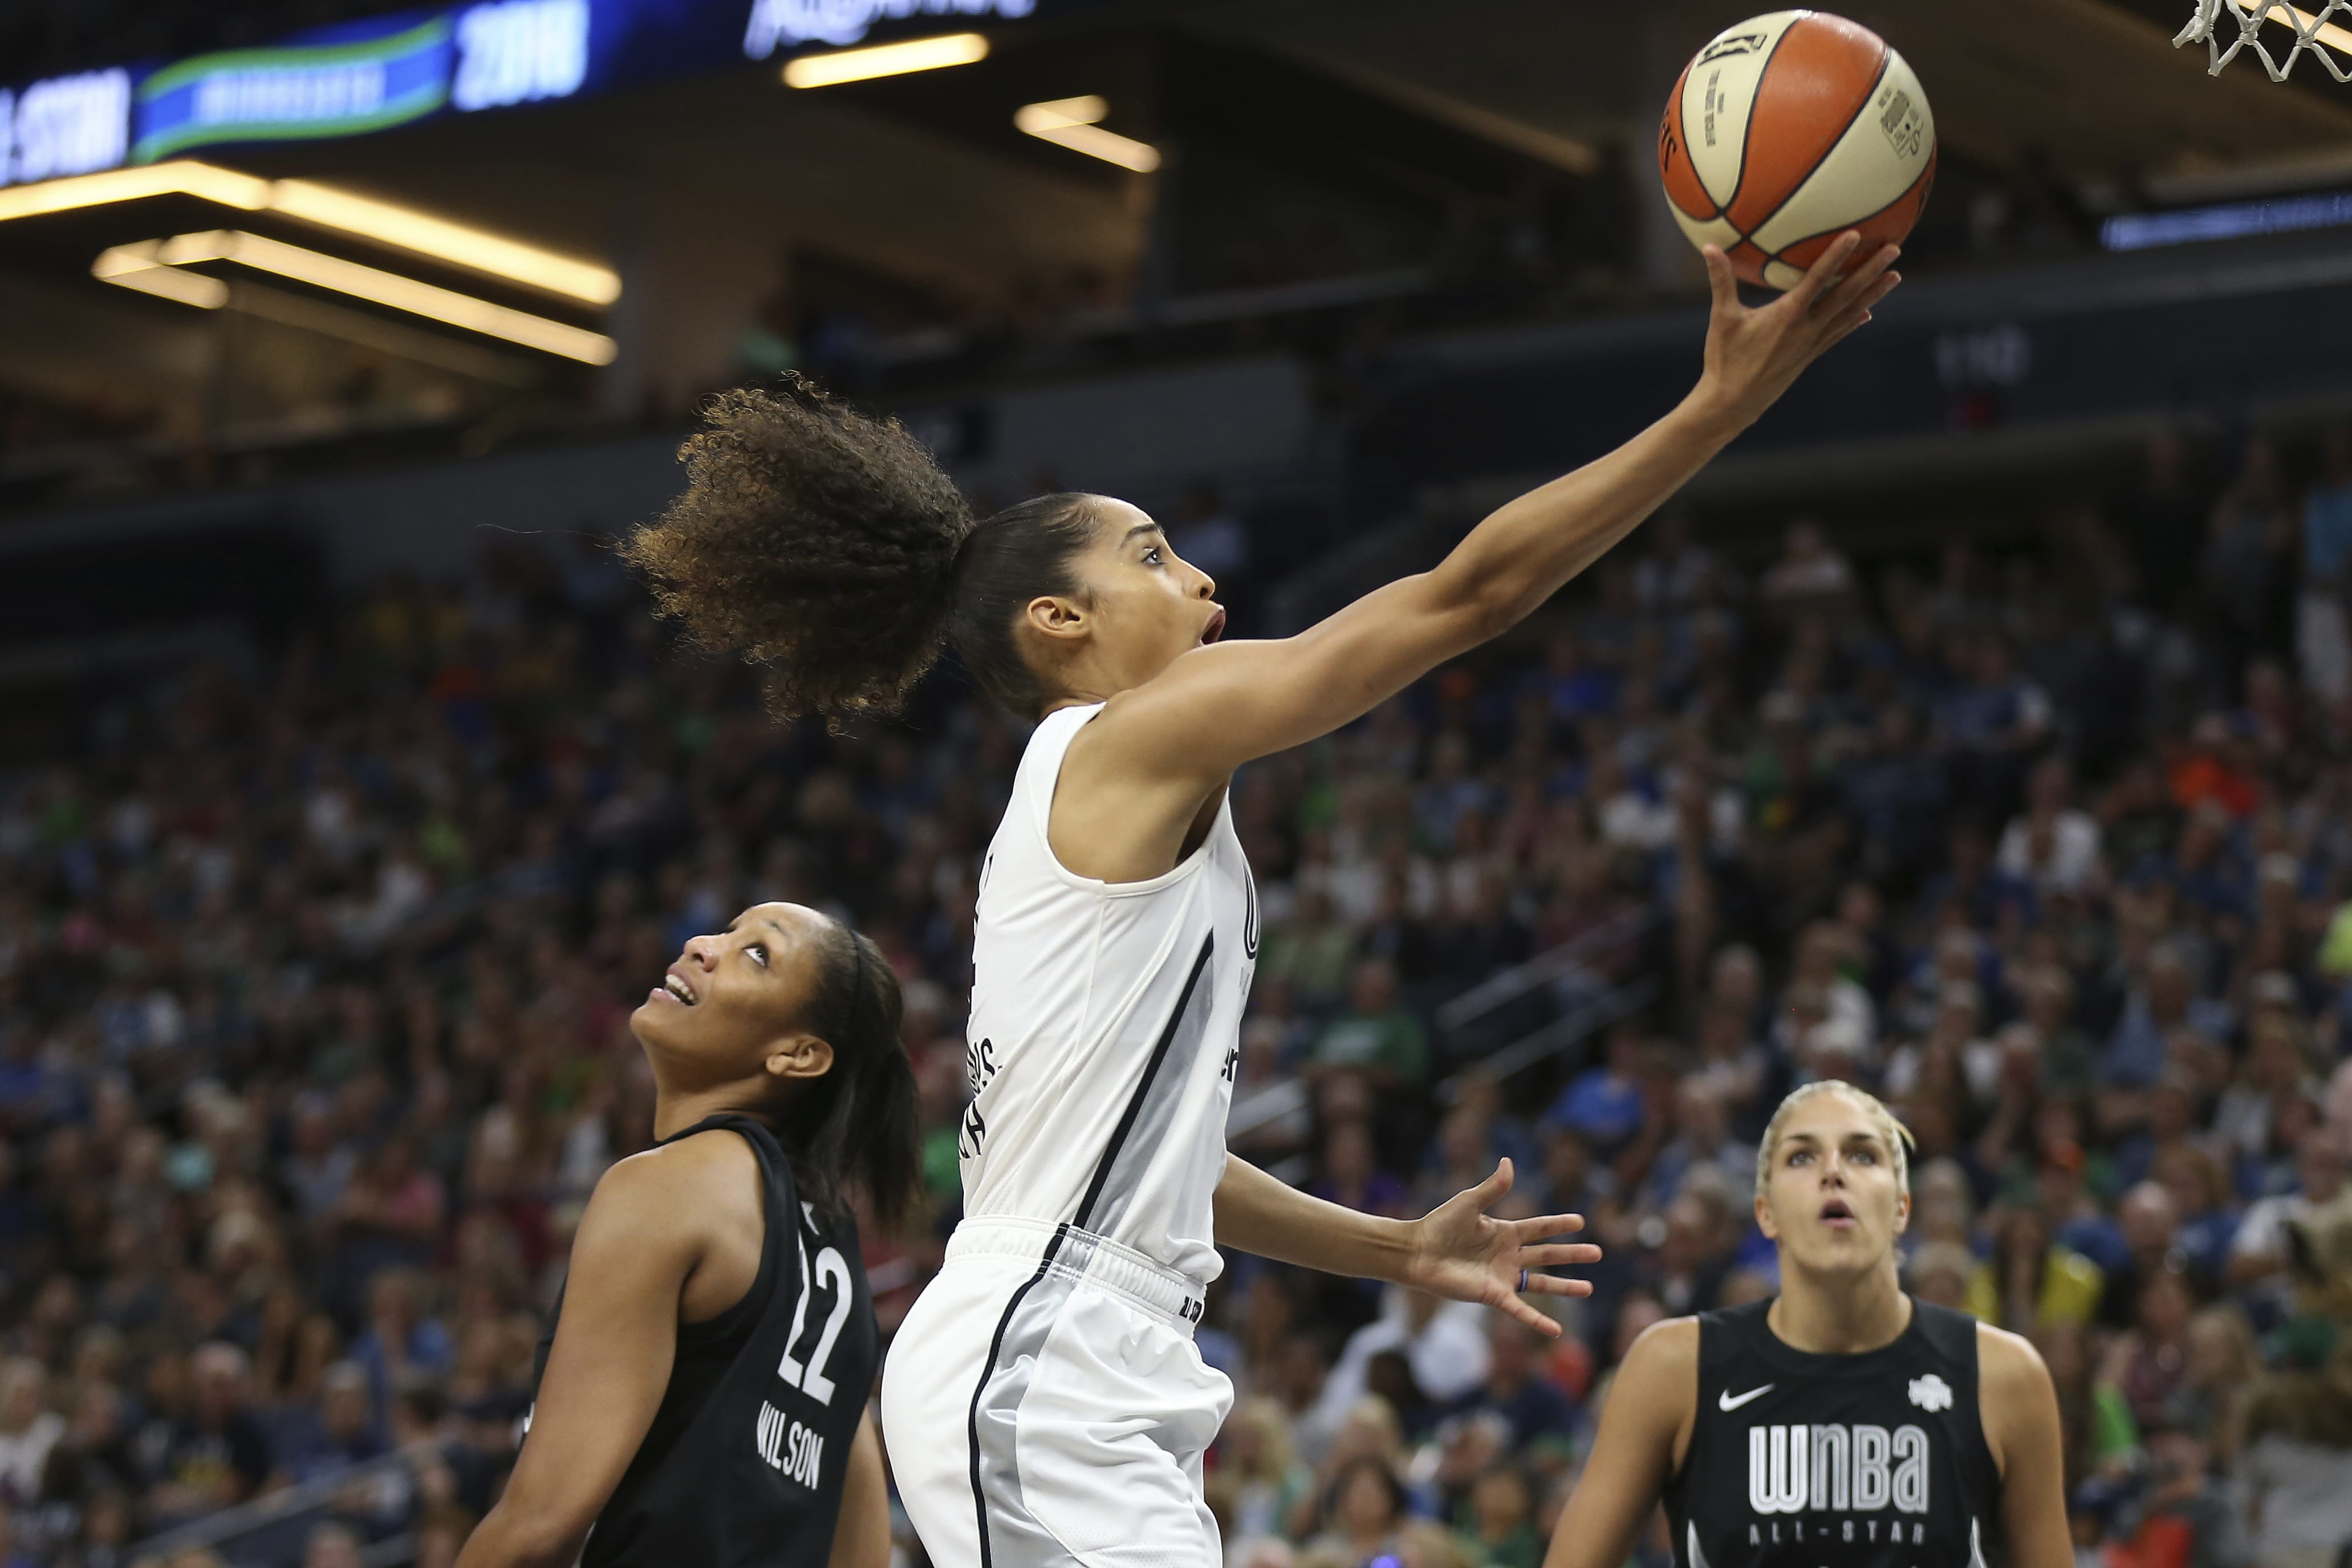 Team Candace Parker's Skylar Diggins-Smith, center, goes to the basket against Team Delle Donne's A'ja Wilson (22) in the first half of the WNBA All-Star basketball game Saturday, July 28, 2018 in Minneapolis.